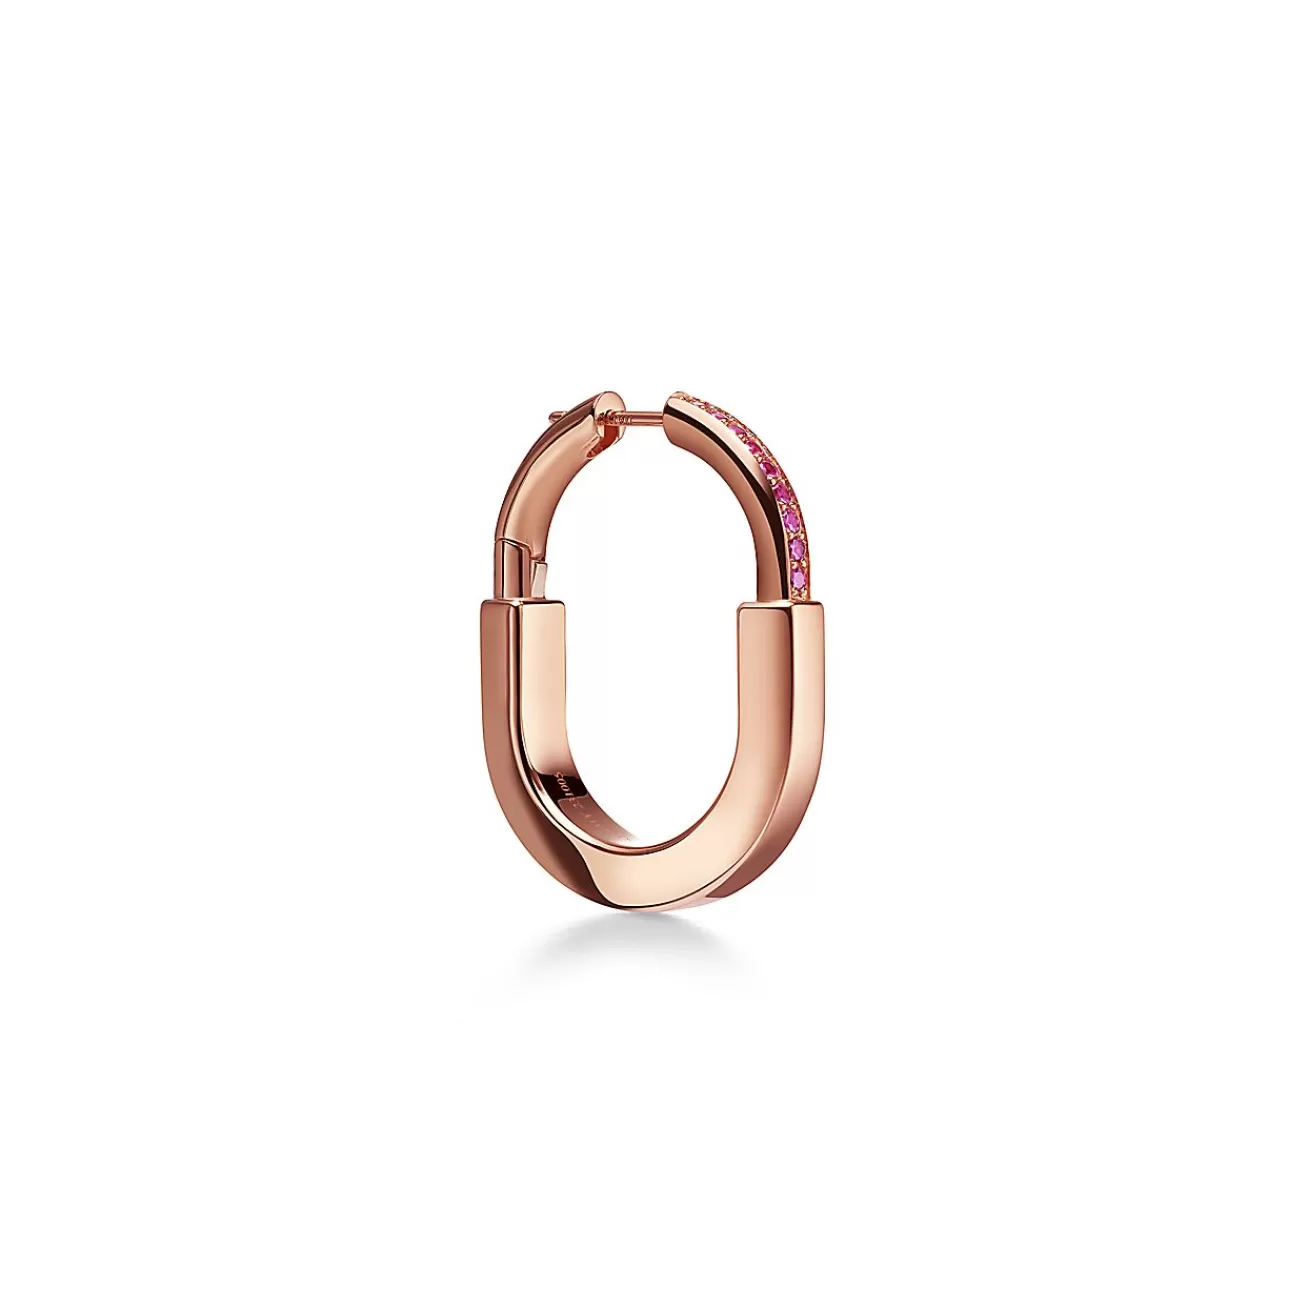 Tiffany & Co. Tiffany Lock Medium Earrings in Rose Gold with Pink Sapphires | ^ Earrings | New Jewelry